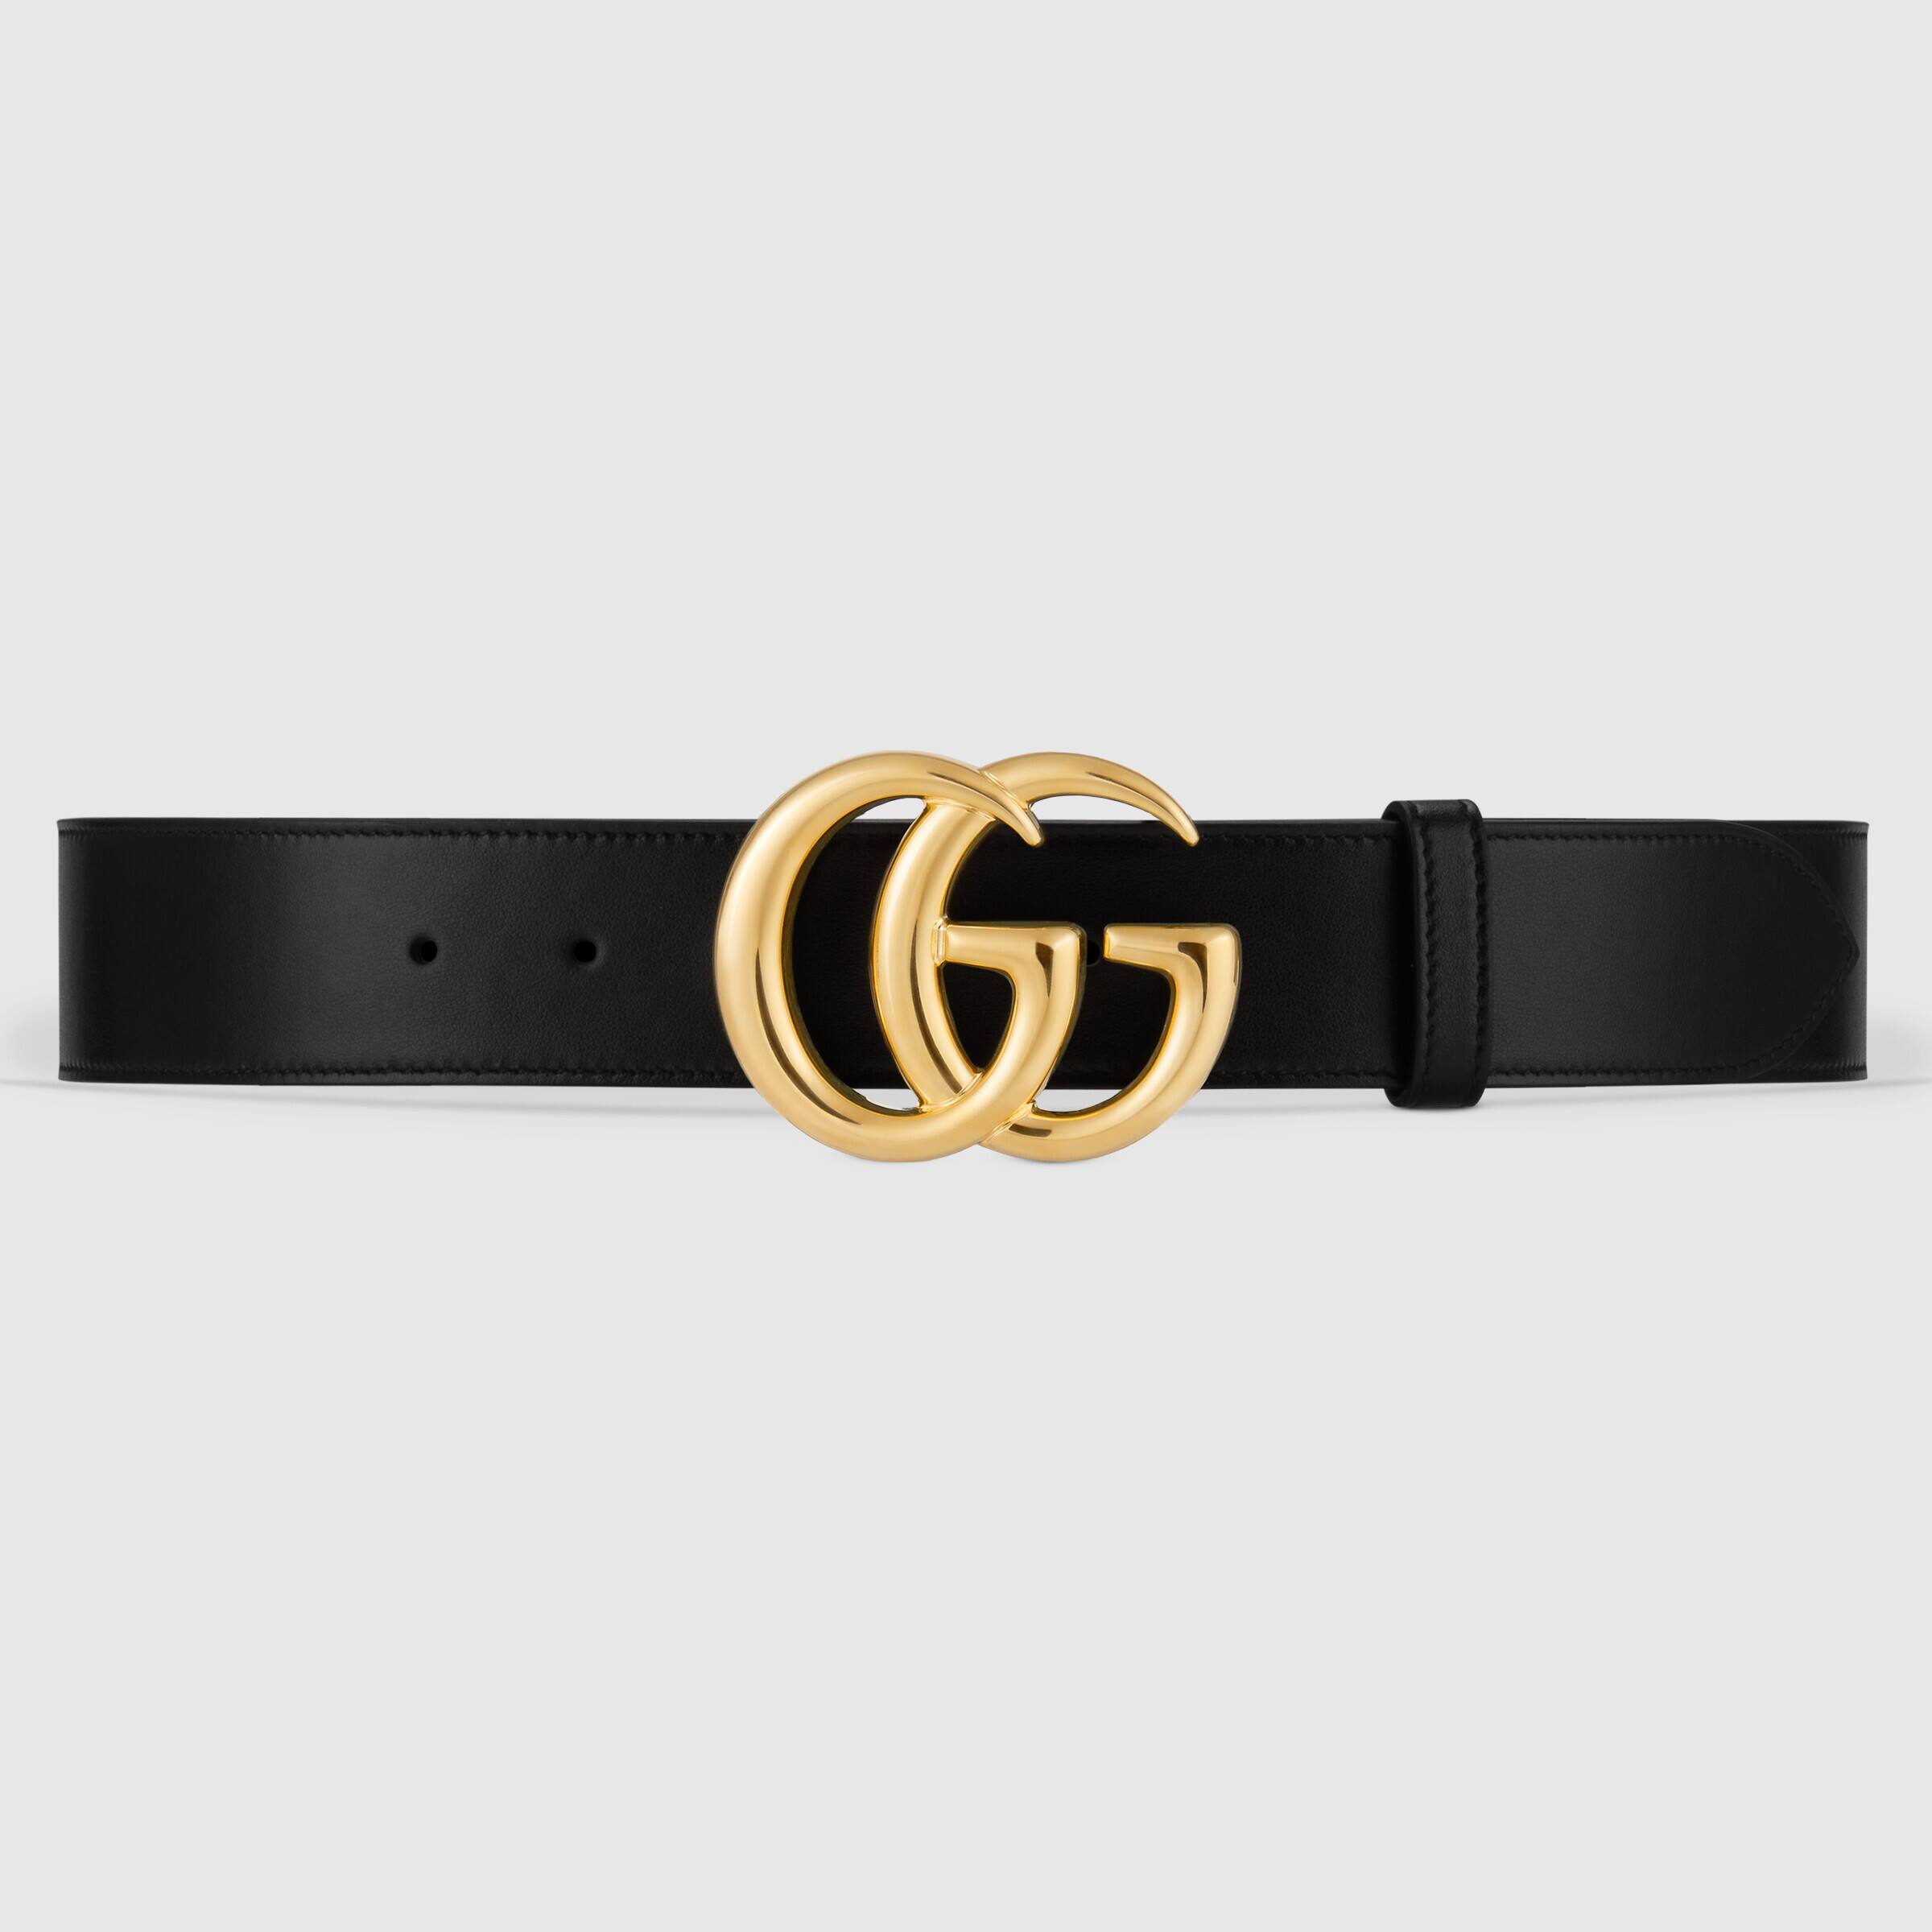 Gucci 40mm Gg Buckle Leather Belt  Gucci marmont belt, Gucci belt, Tan  leather belt